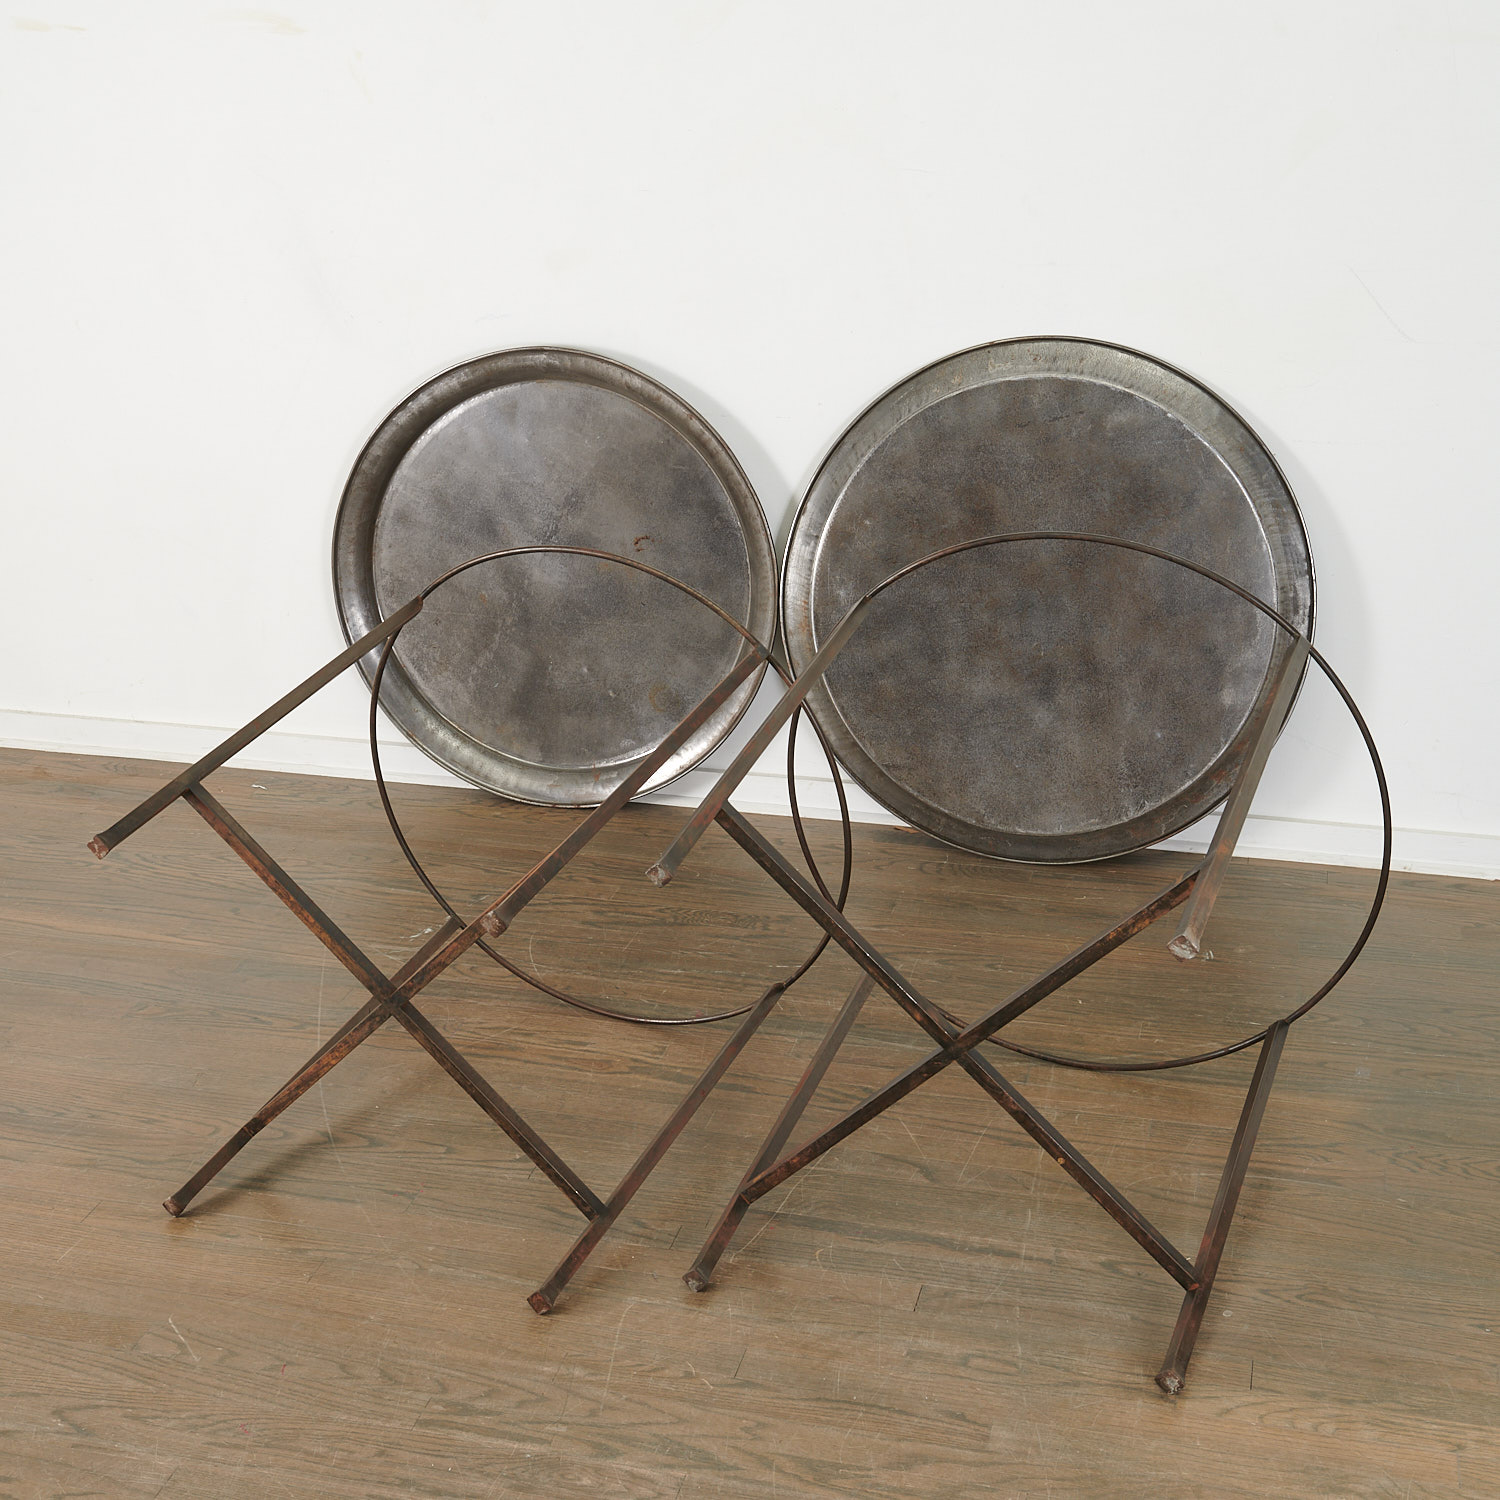 Nice associated pair Industrial tray tables - Image 7 of 7